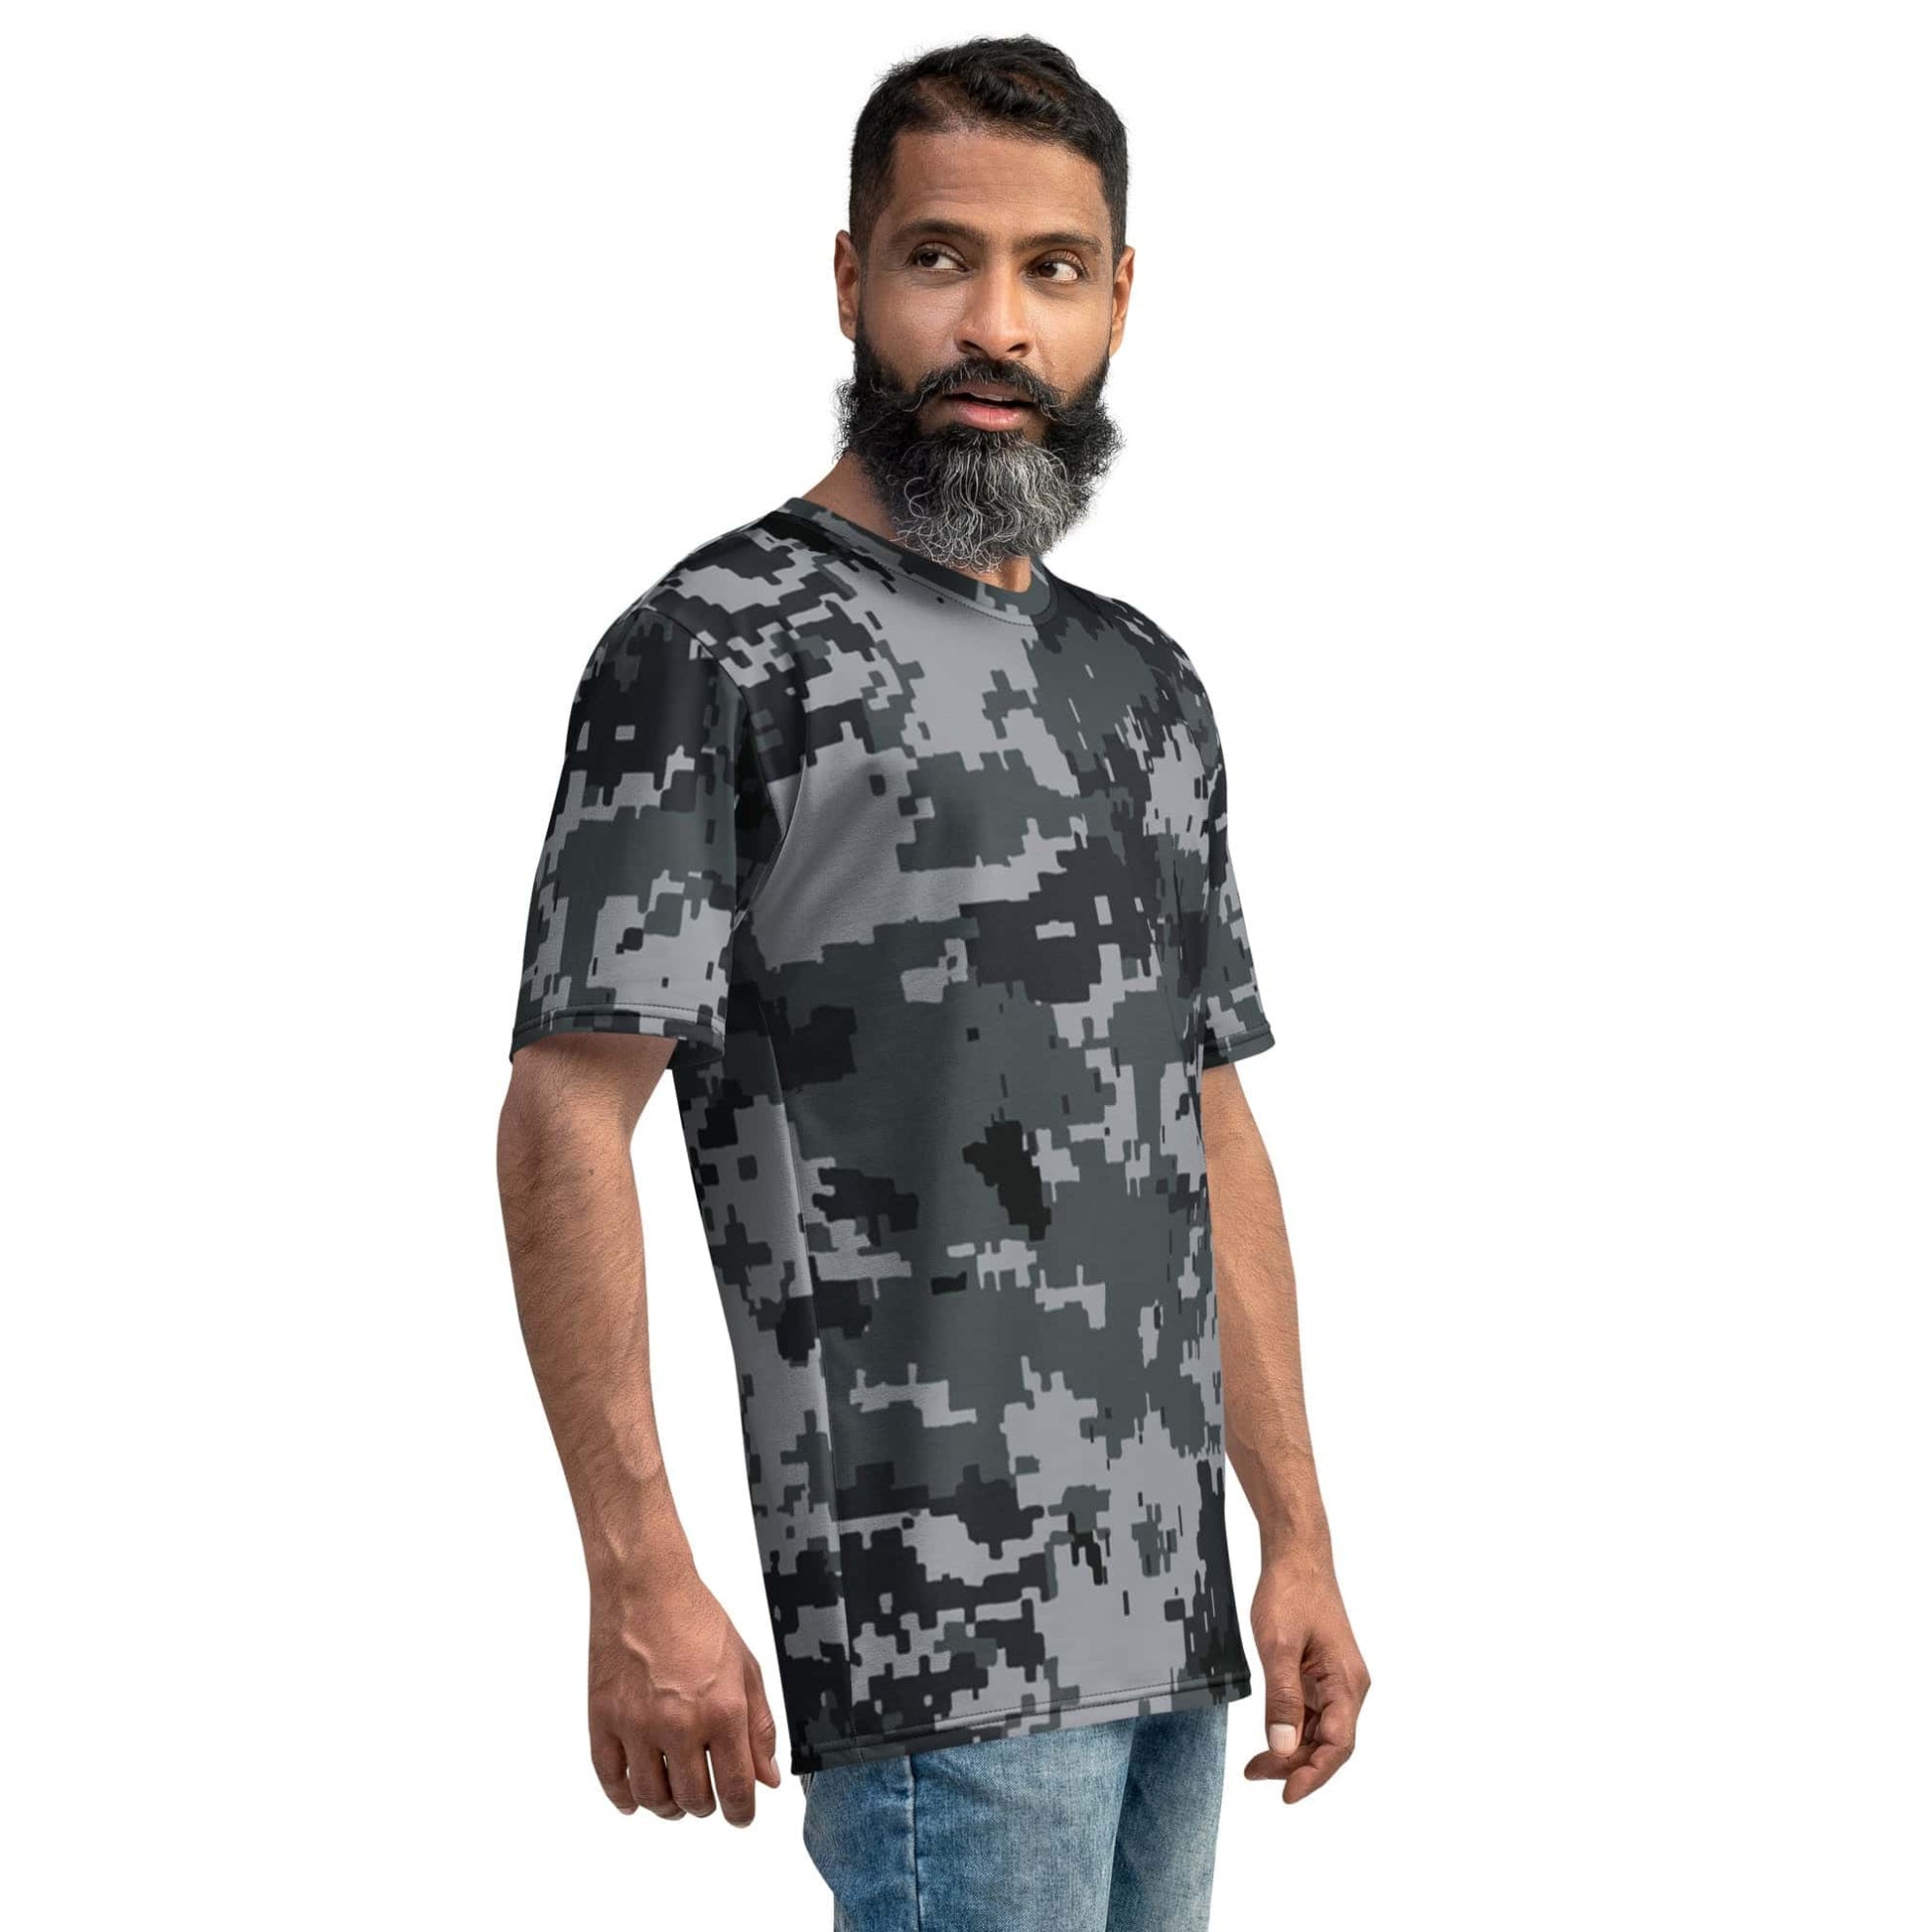 Digital Camo Military Army camouflage Men's T-shirt